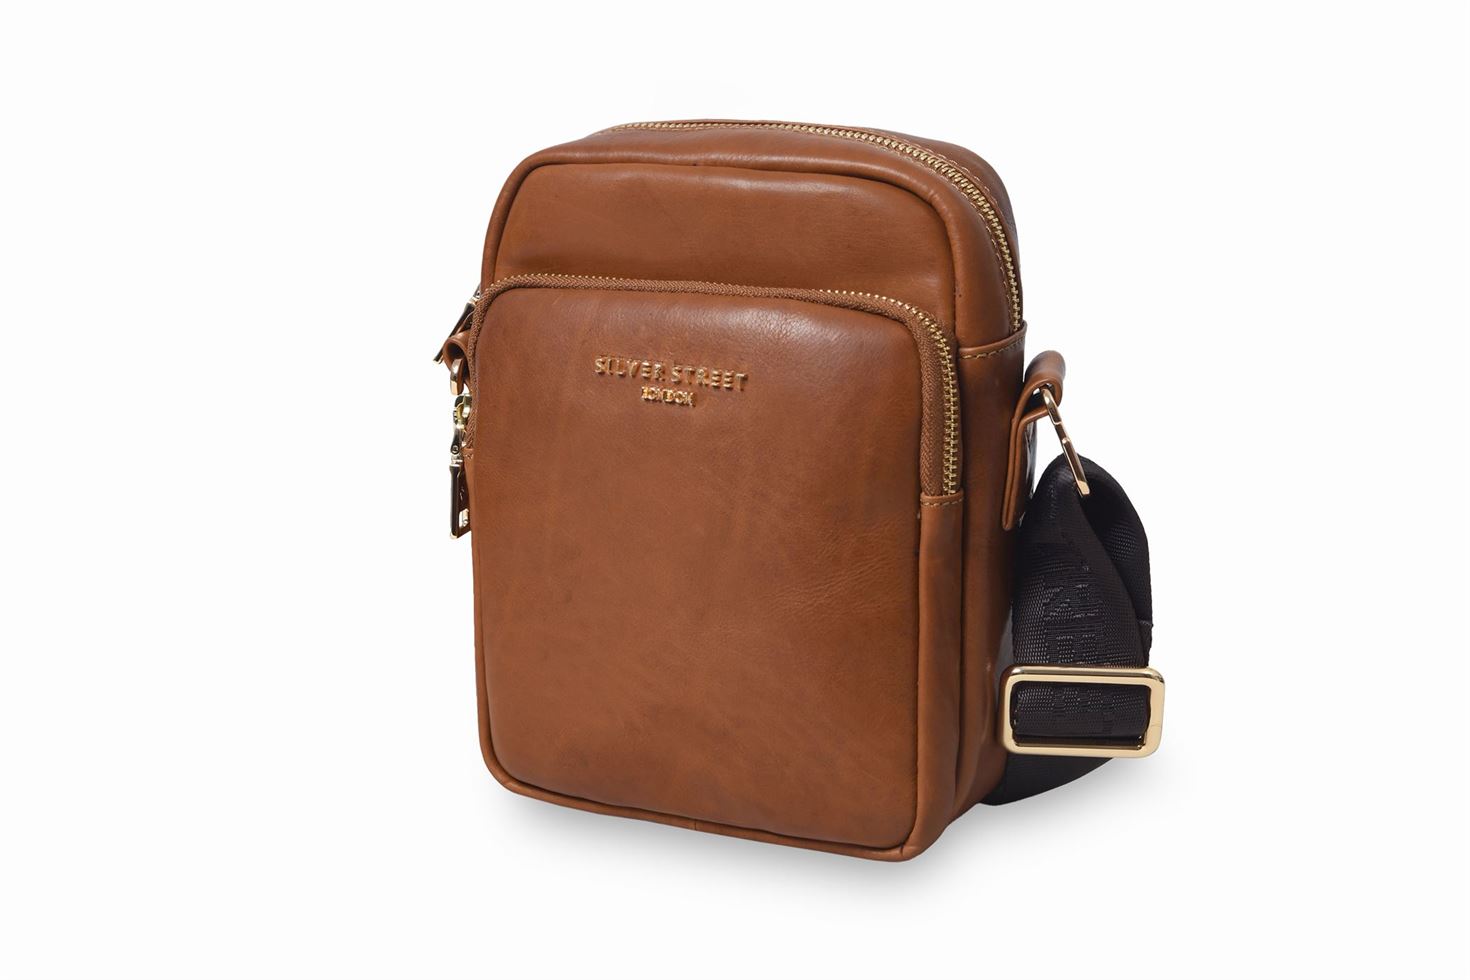 BRAND LEATHER Casual|Business|Travel use Genuine Leather Cross Body Sl